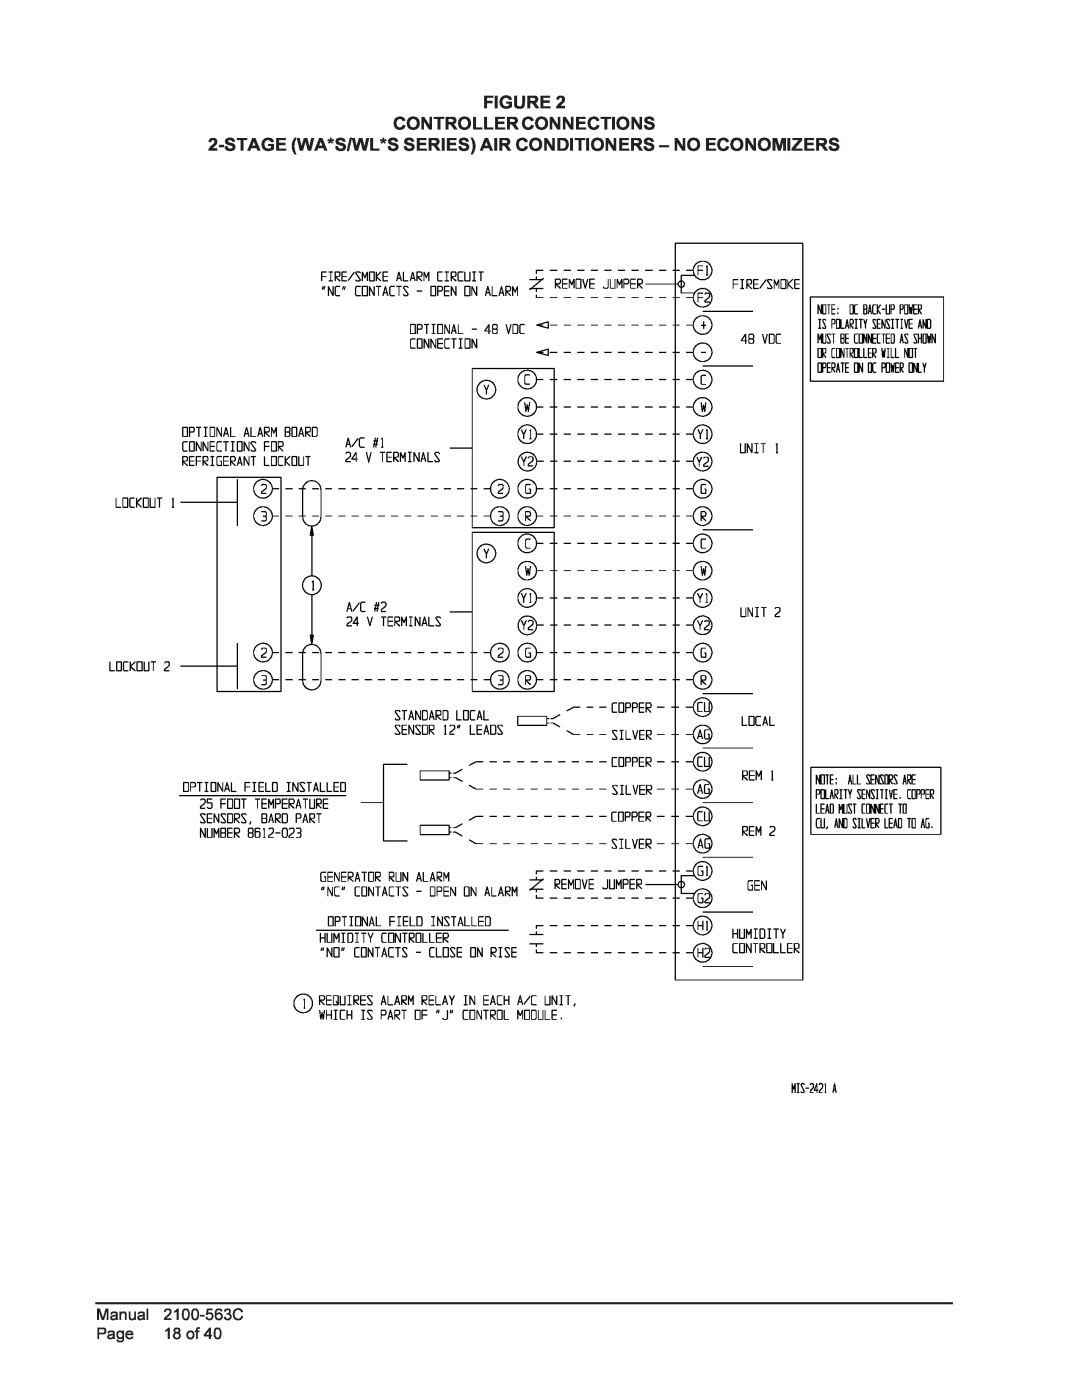 Bard MC4000 installation instructions Figure Controllerconnections, Manual, Page, 18 of, 2100-563C 